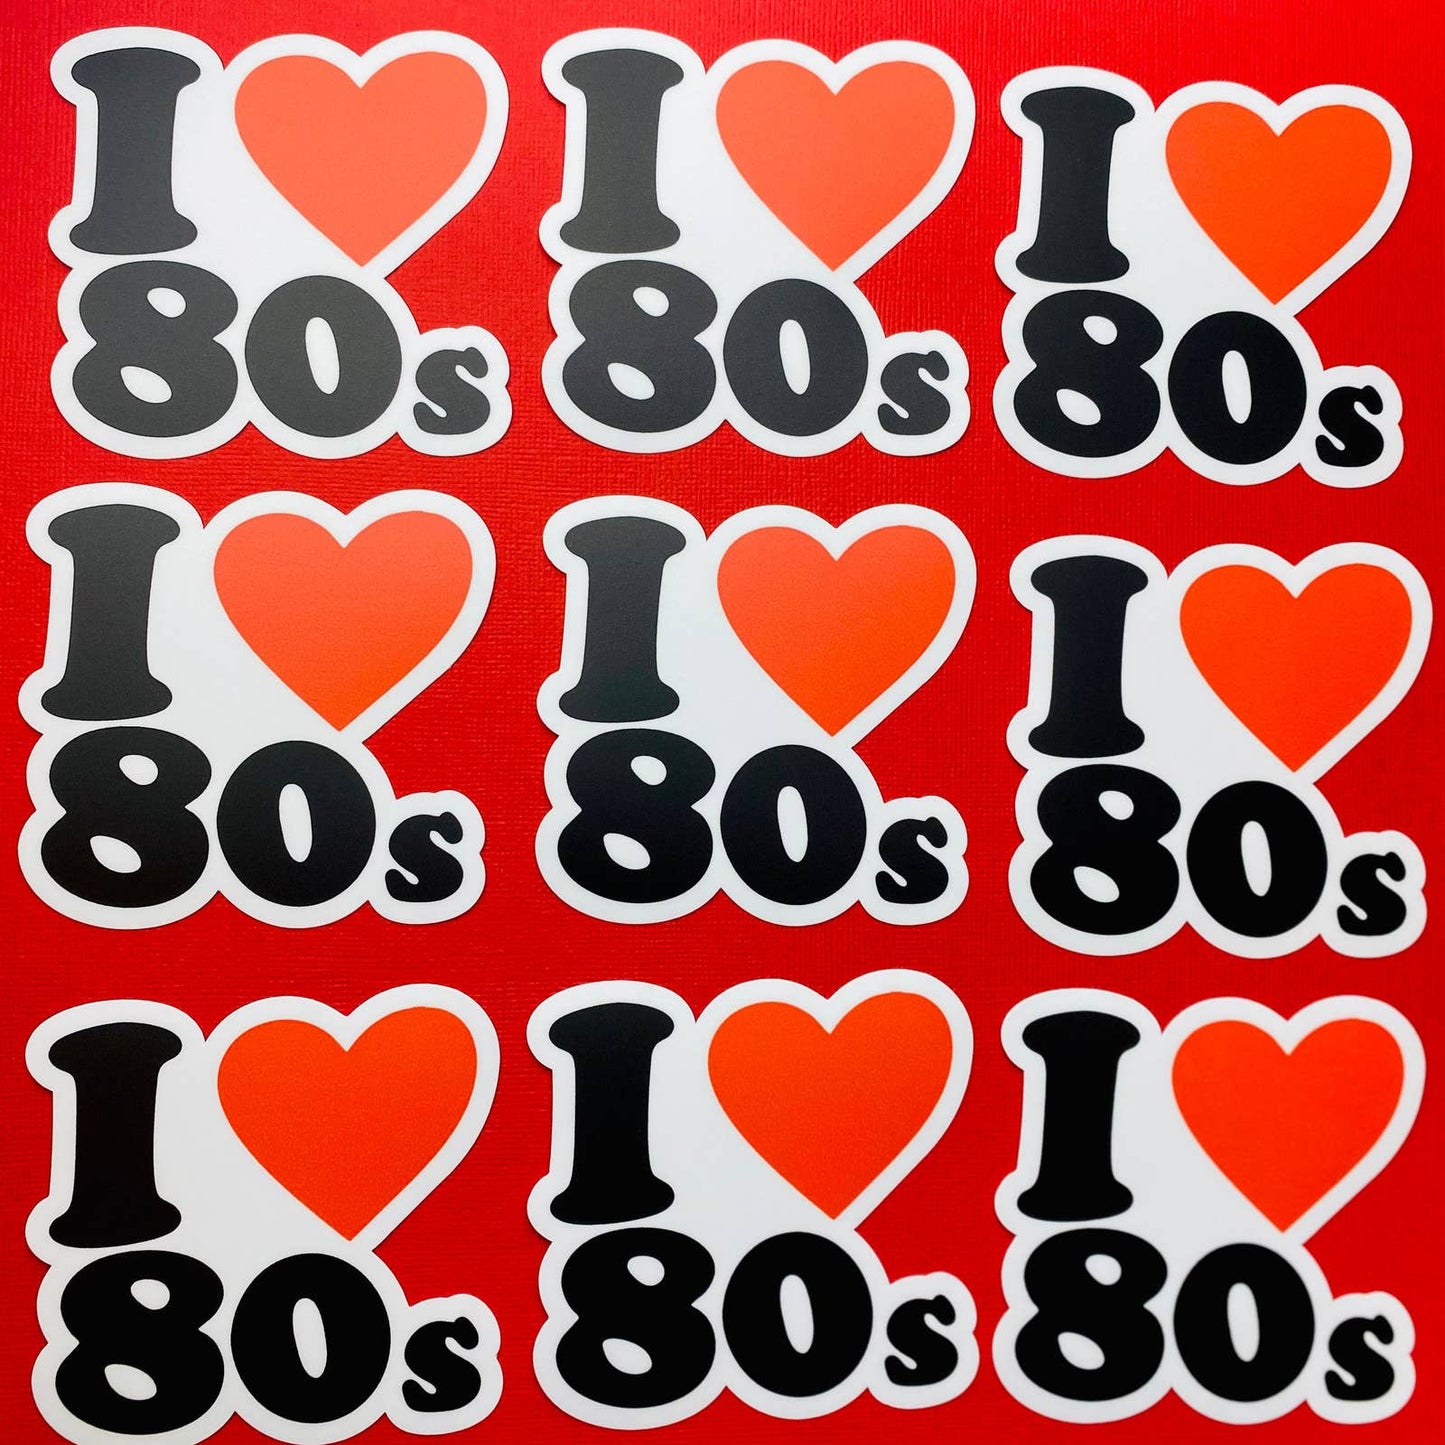 I Love The Eighties Sticker Love The 80s again with this Throwback Sticker! 80s Party Decor